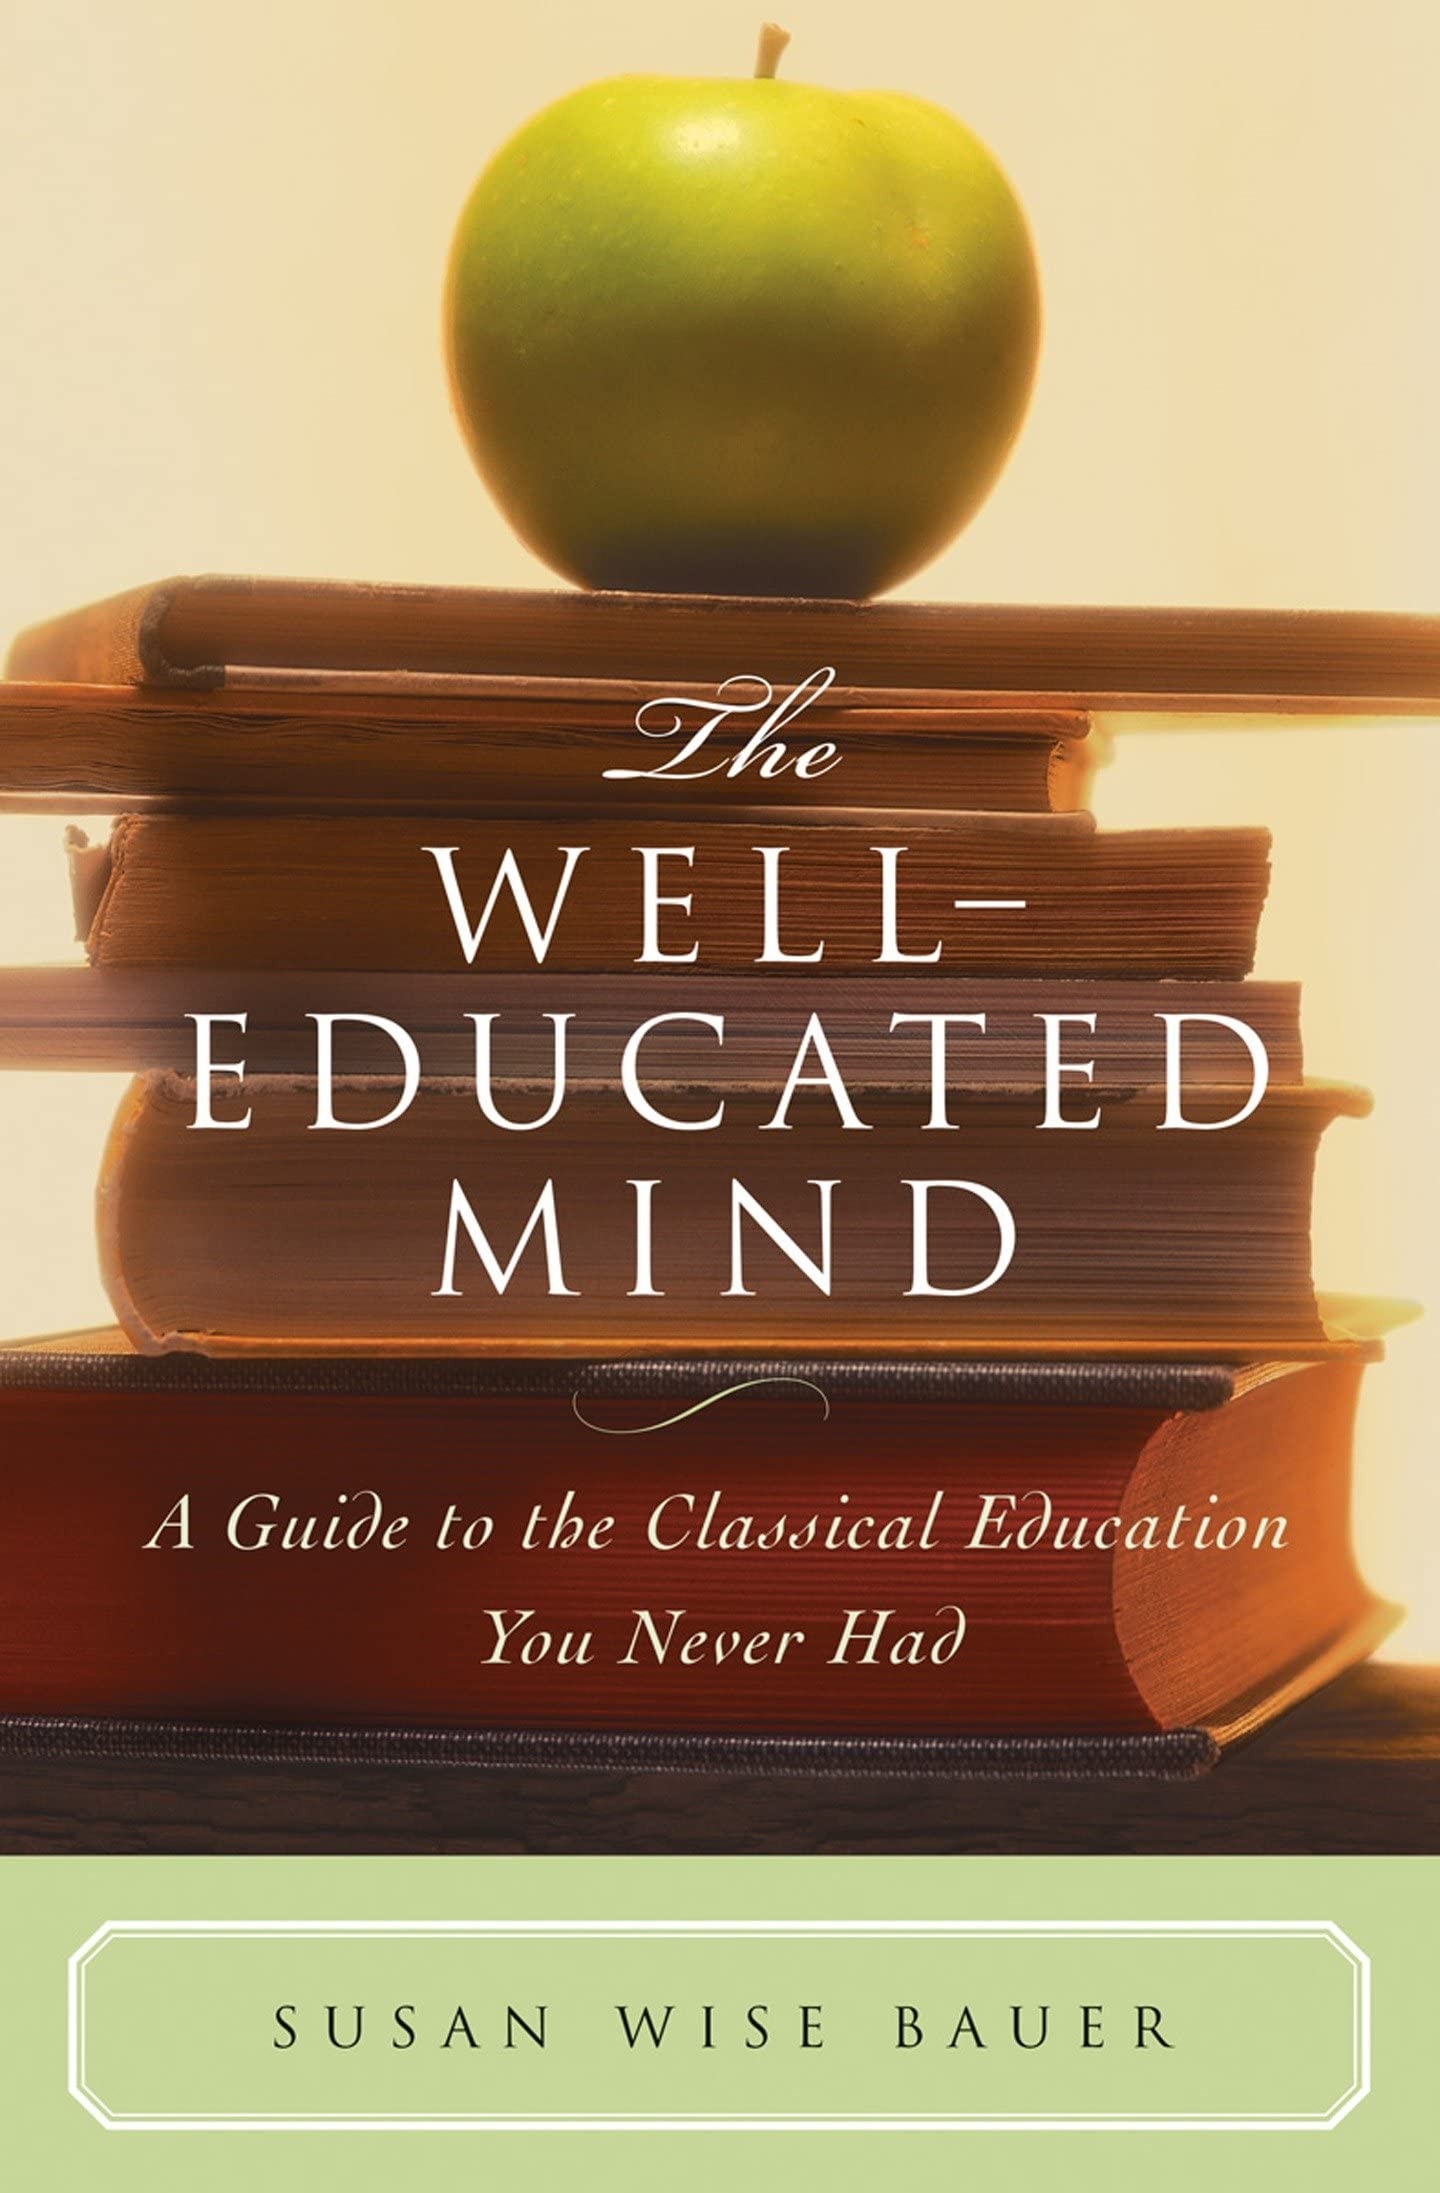 Well Educated Mind: A Guide to the Classical Education You Never Had